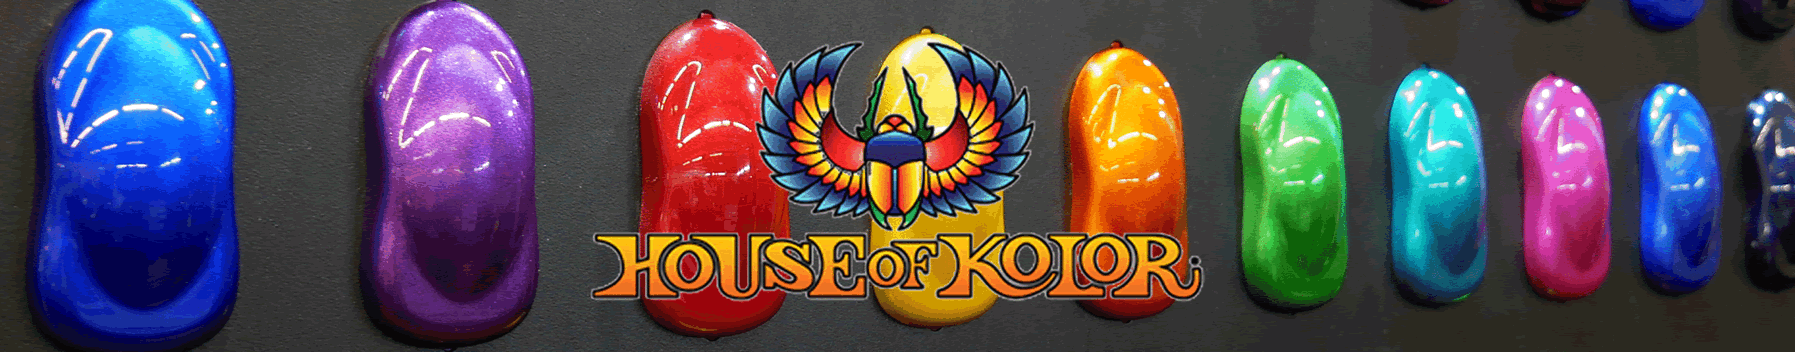 House Of Kolor From Jawel Paints - House Of Kolor Paint For Cars